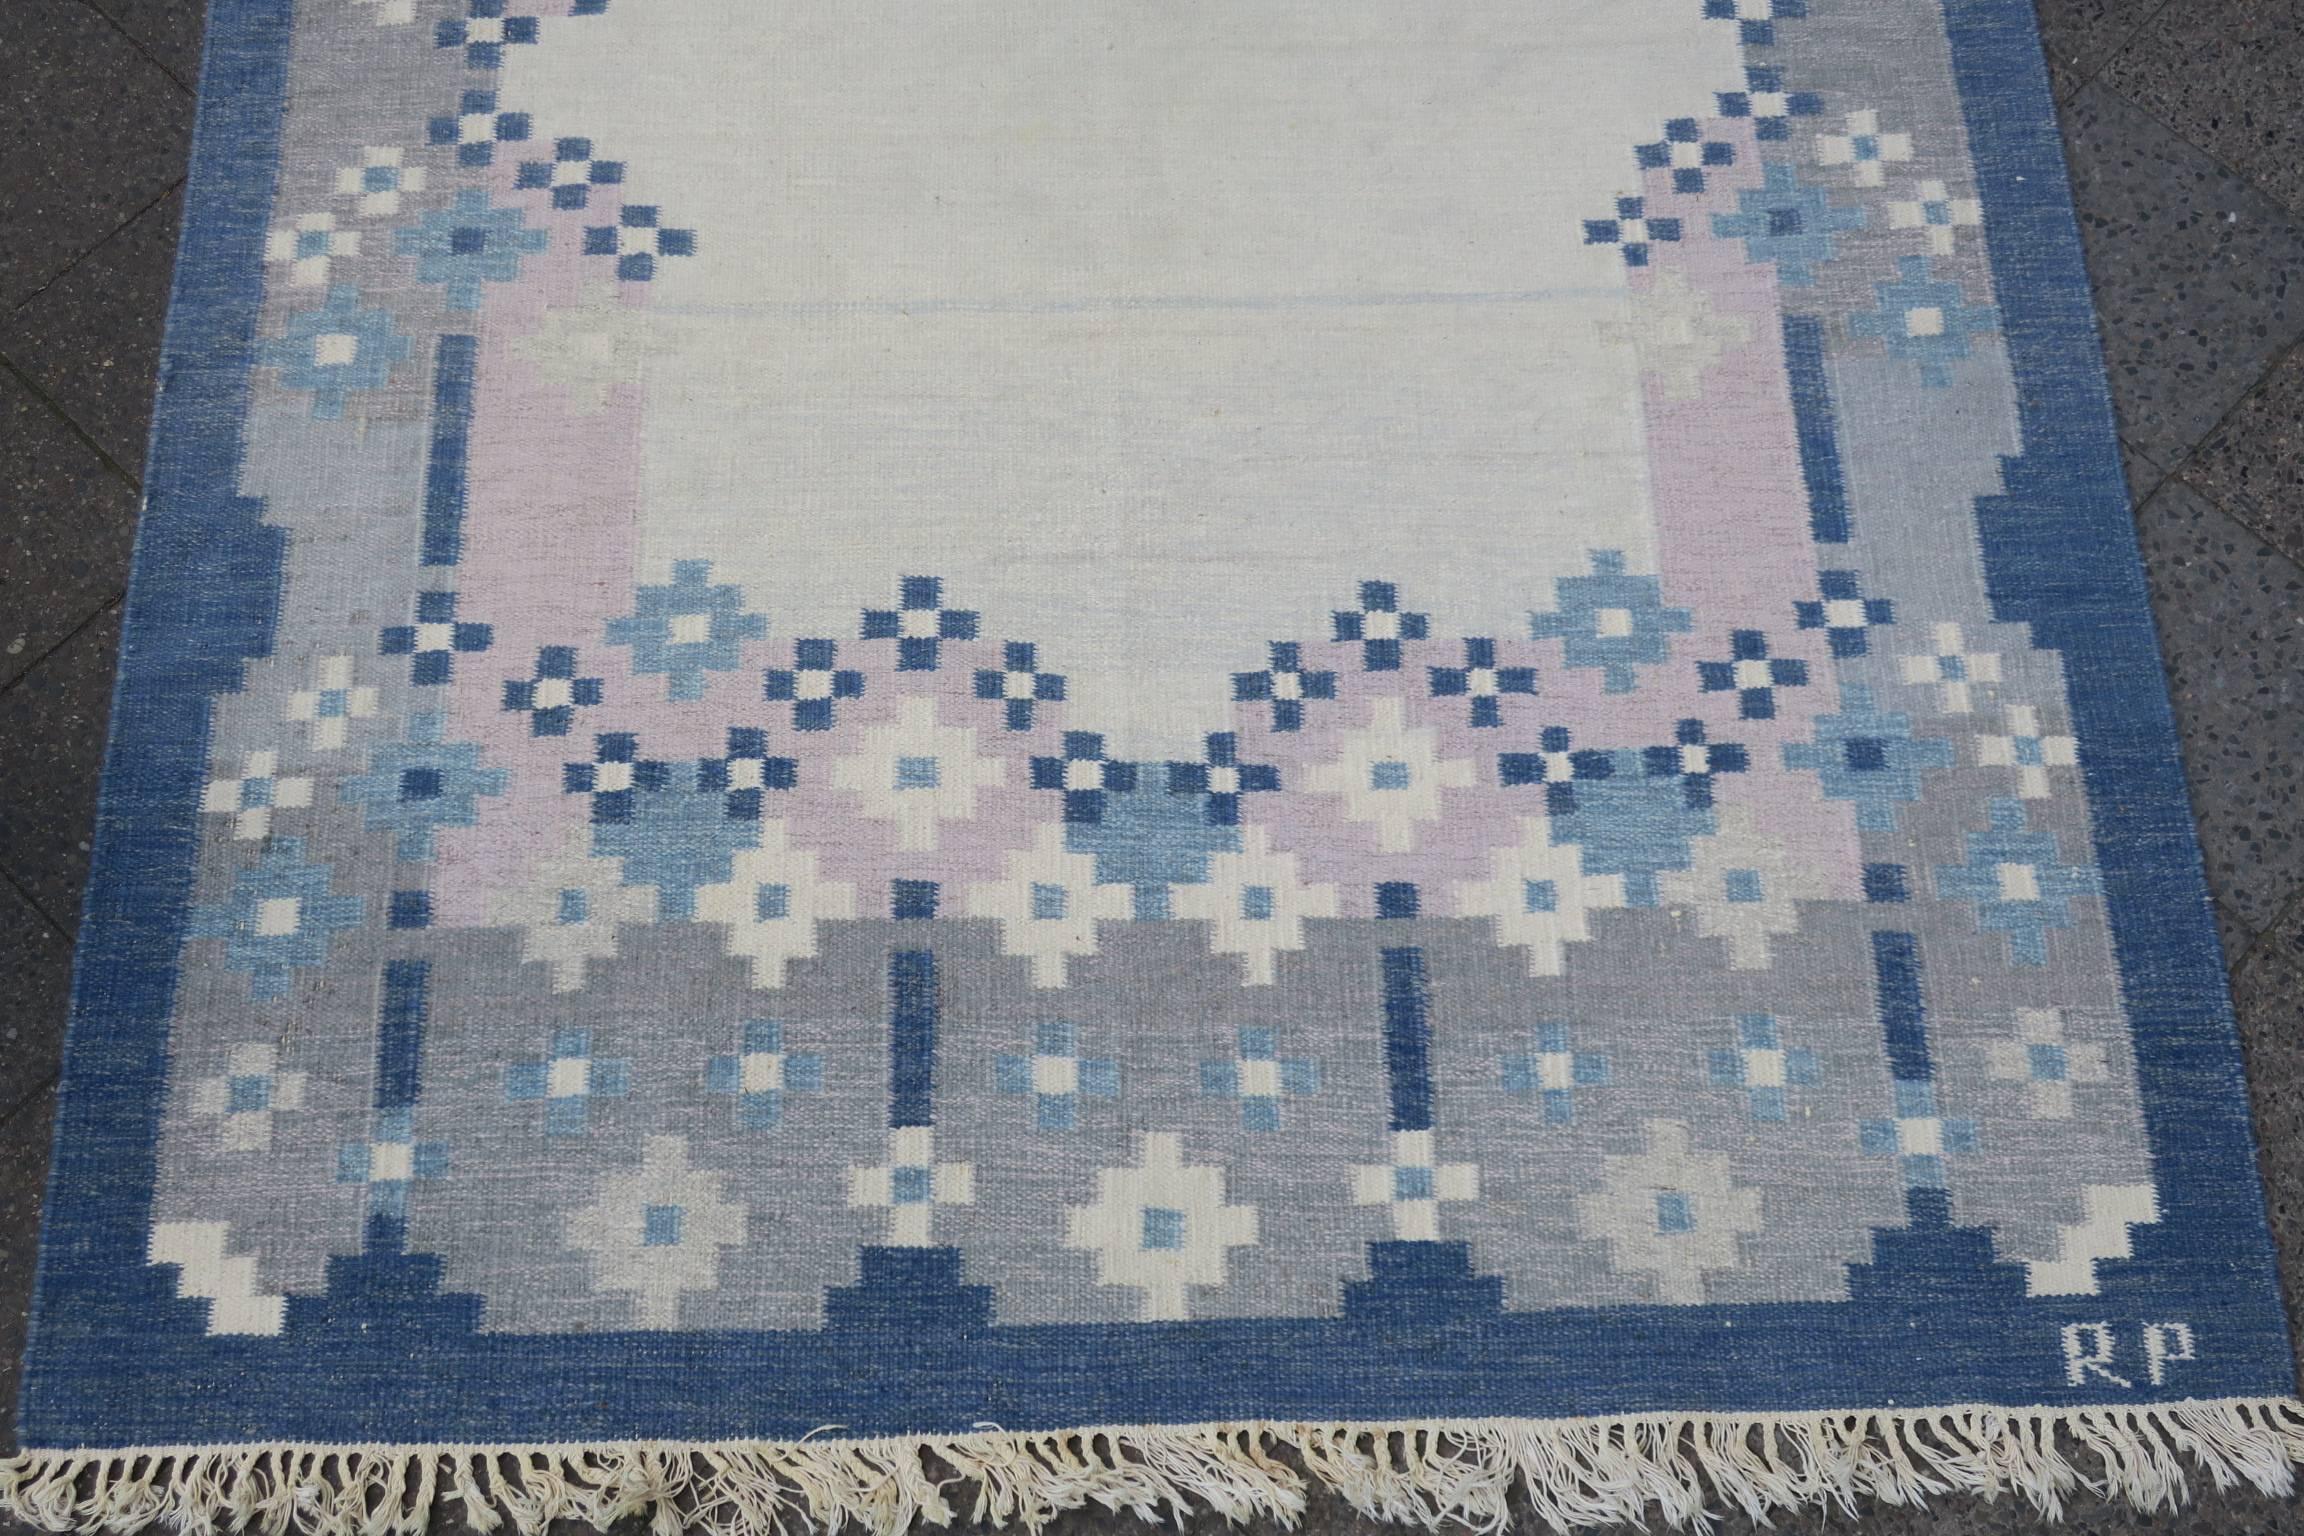 Midcentury Scandinavian signed kelim with a geometric design in light colors. Both sides can be used, with slightly different coloring on each side (the last three pictures show the 'back' of the rug).